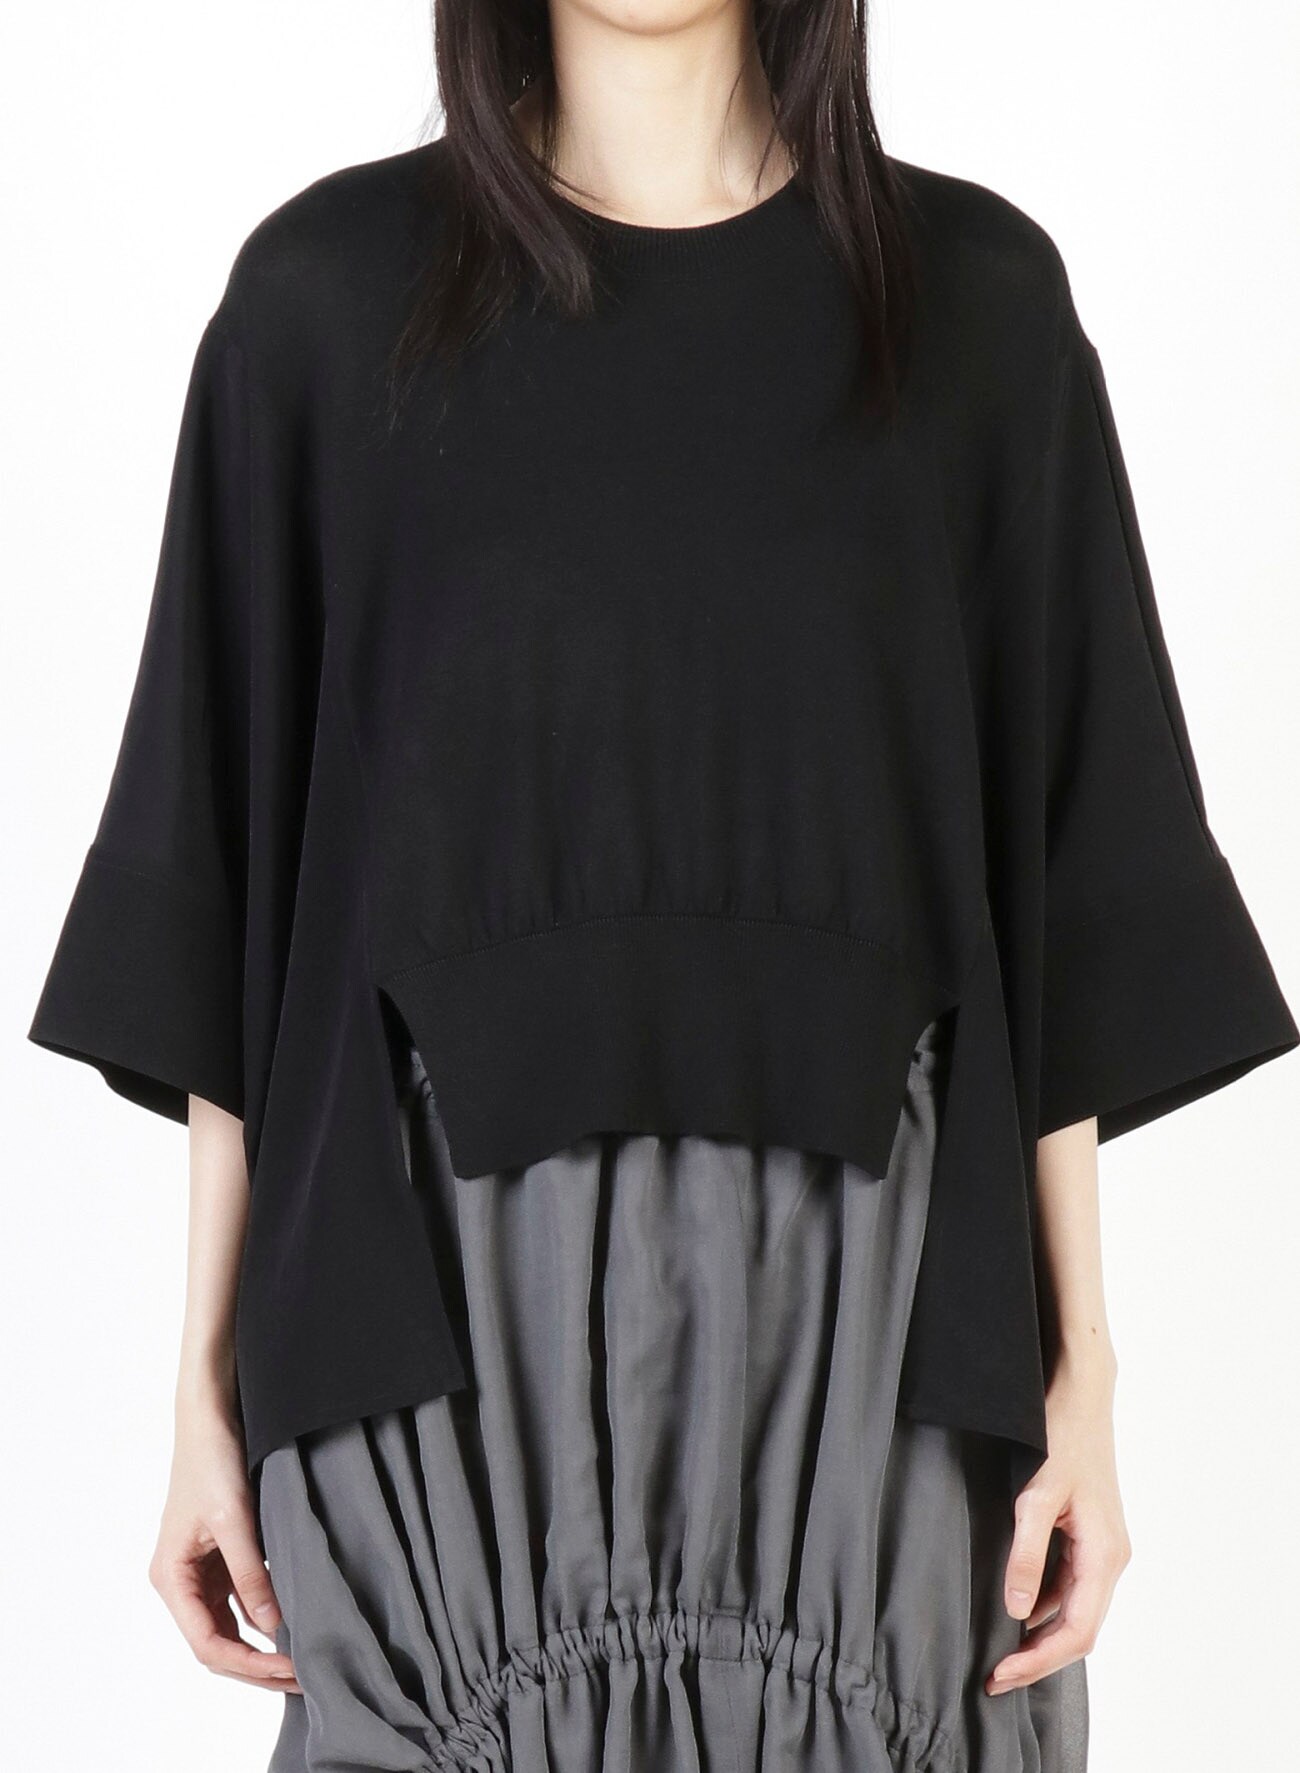 TRIACETATE POLYESTER de CHINE + COTTON RAYON SILK DUAL FABRIC PANEL PULLOVER